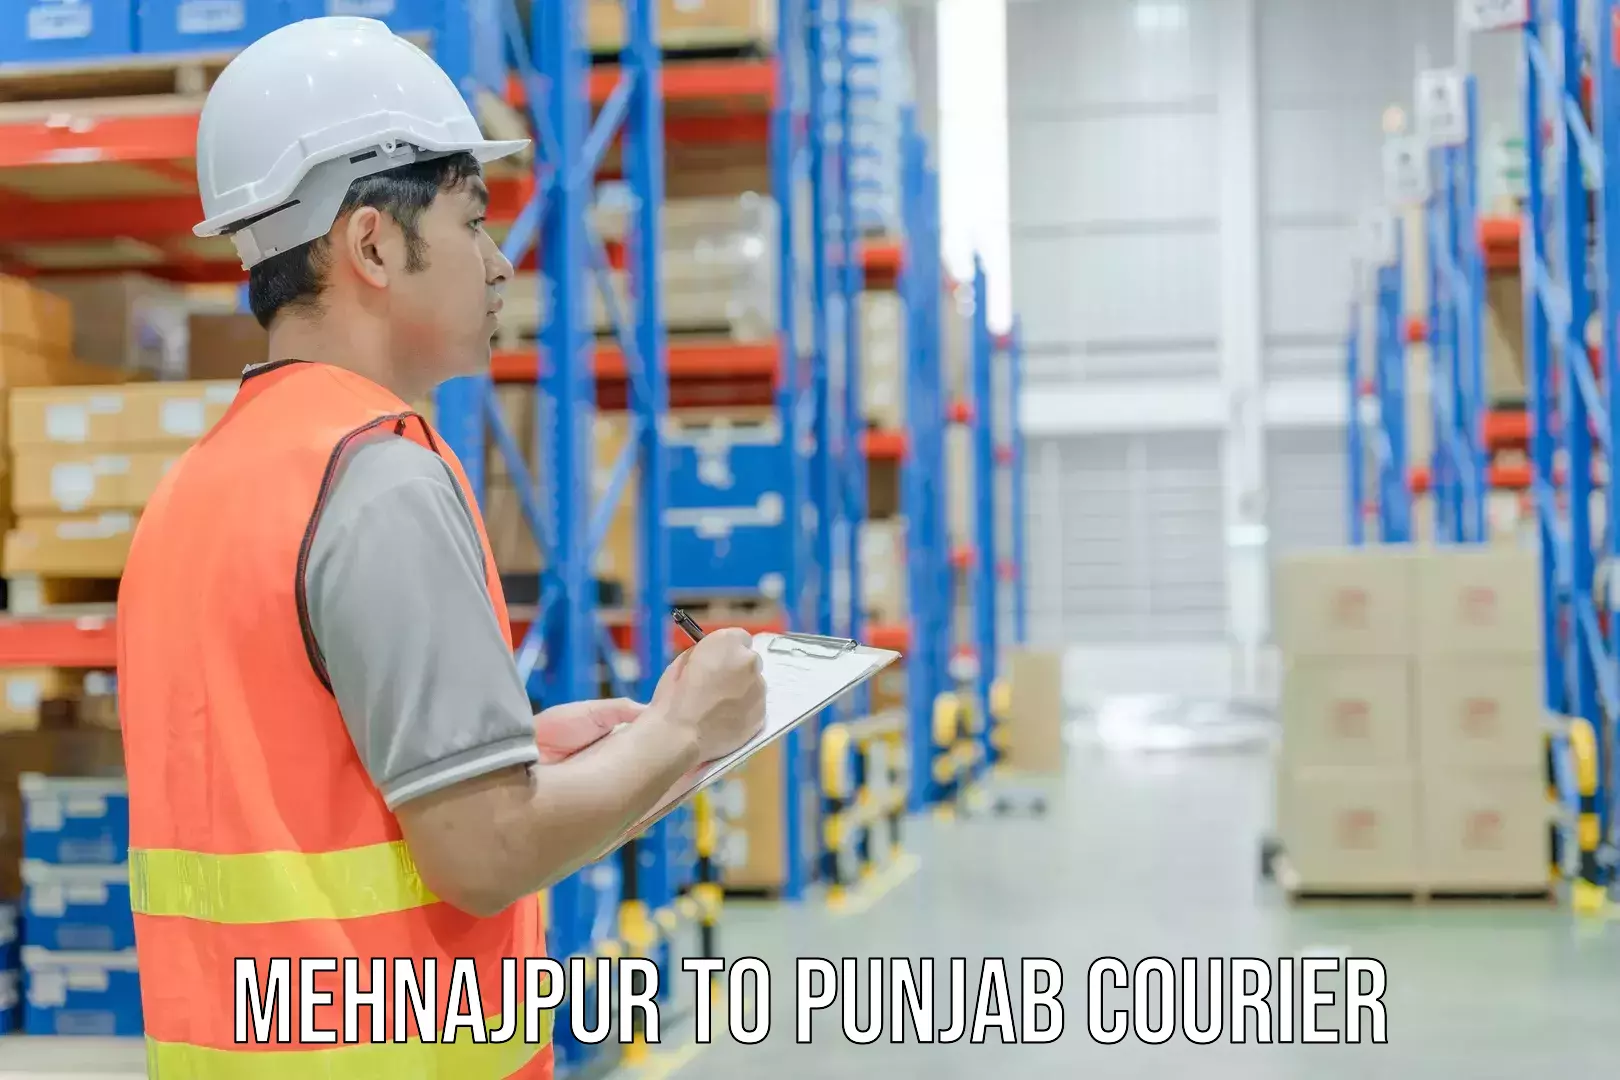 Express delivery network Mehnajpur to Punjab